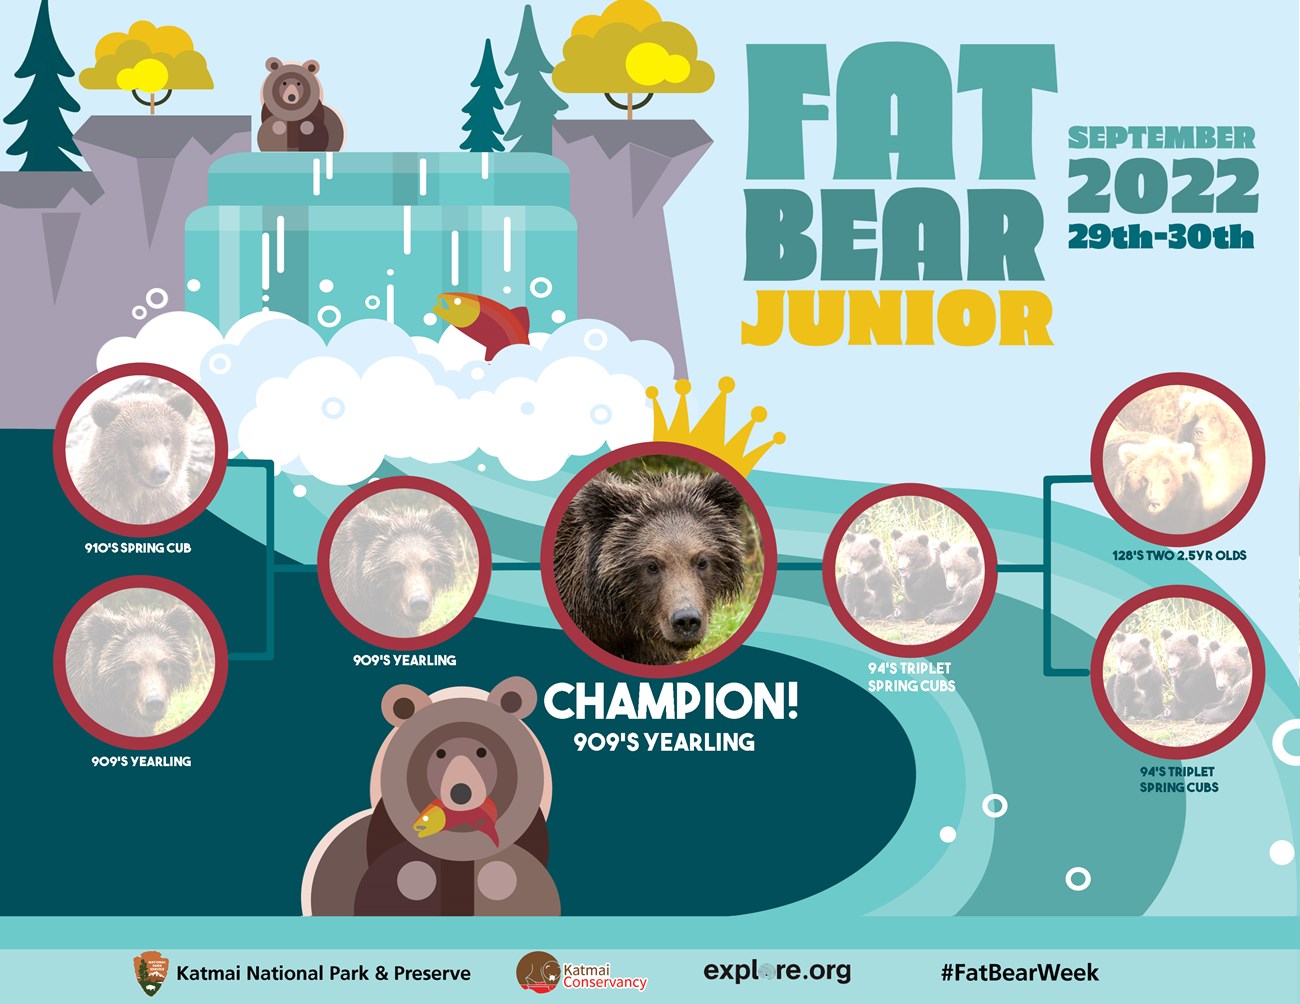 Bracket showing 909 cub as Fat Bear Junior champ after having competed against 910's cub and 94's three spring cubs